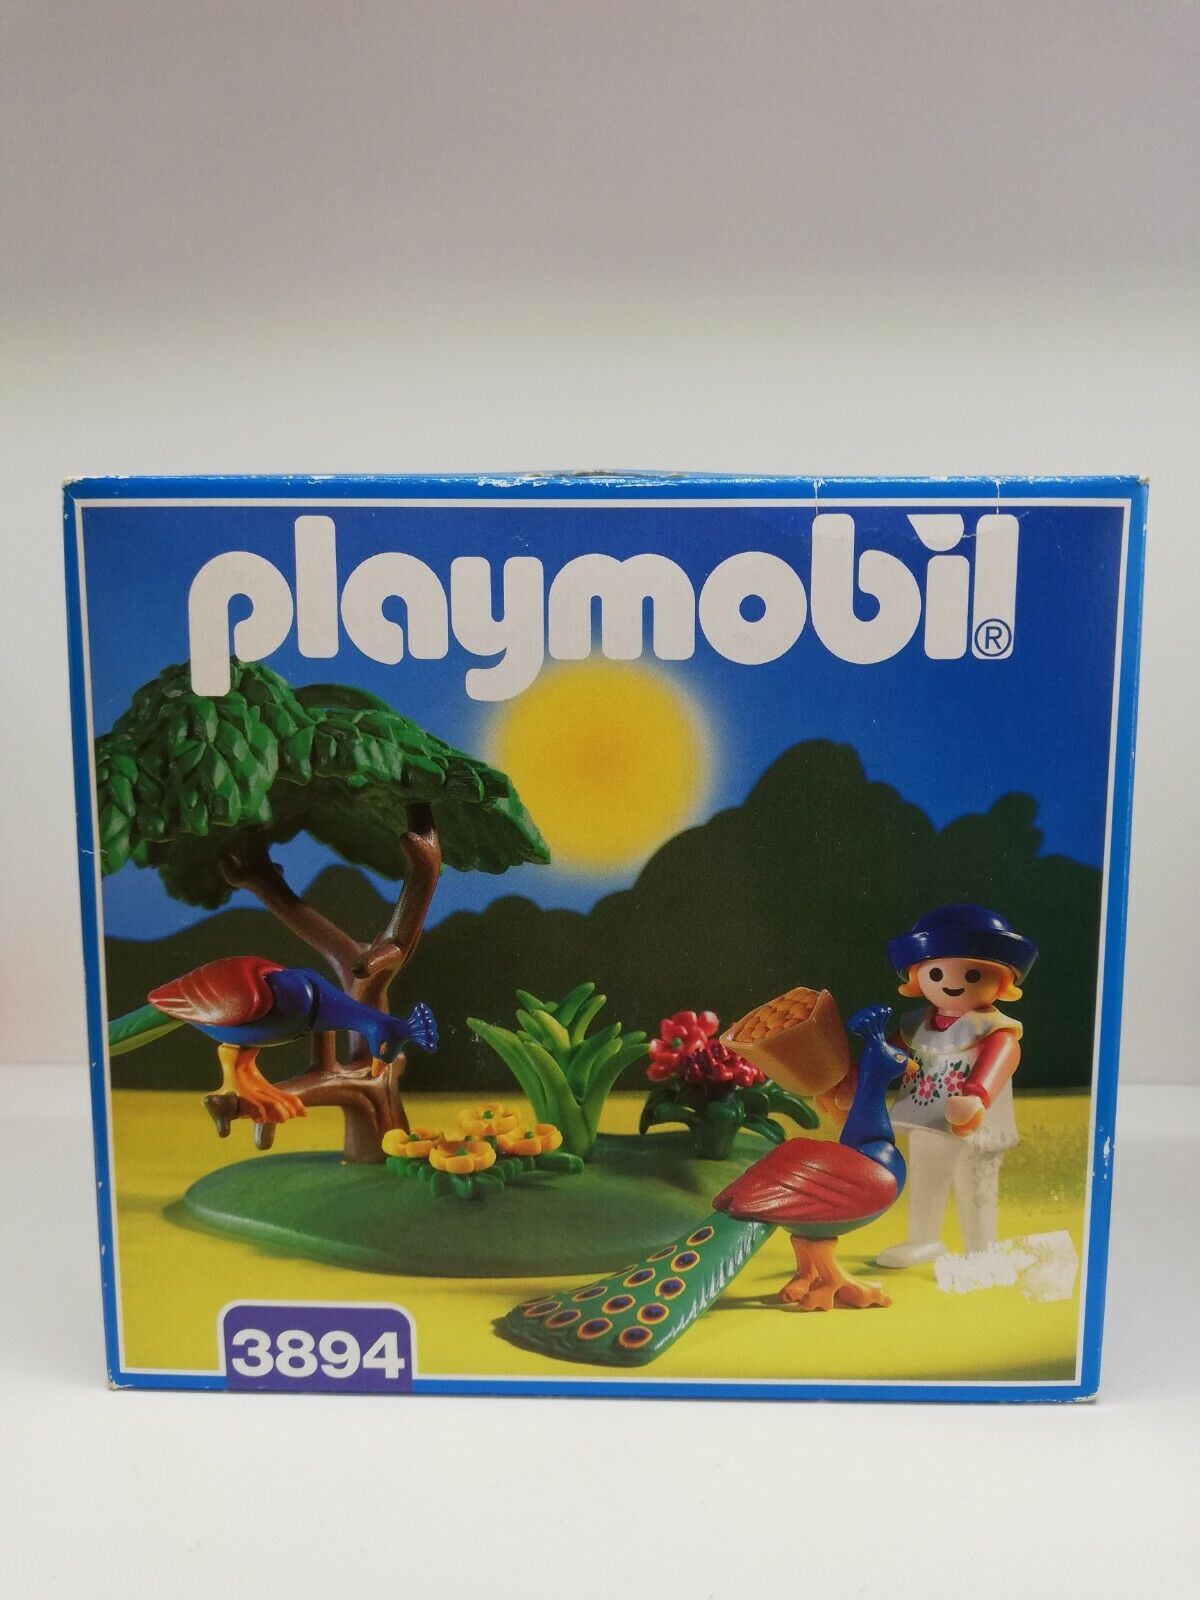 Playmobil 3894 Super popular specialty store New Sealed Super-cheap